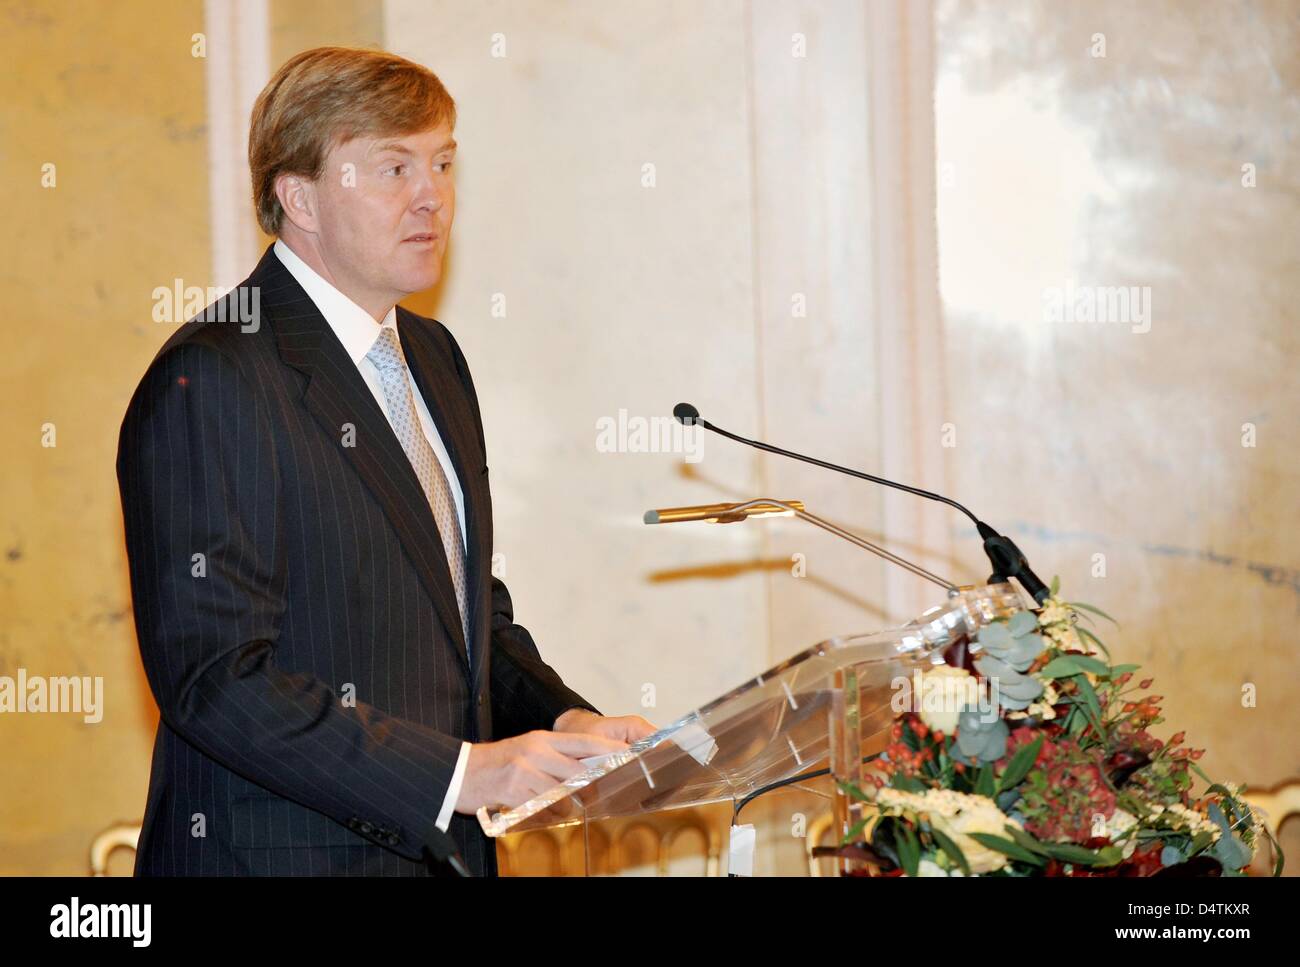 Crown Prince Willem-Alexander of the Netherlands delivers a speech during the award ceremony of Erasmus Prize 2009 at Palace Noordeinde in The Hague, the Netherlands, 13 November 2009. The prize endowed with 150,000 euro was awarded to Benjamin Ferencz, US prosecutor at the Nuremberg Trials, and Italian jurist Antonio Cassese, the first President of the International Criminal Tribu Stock Photo